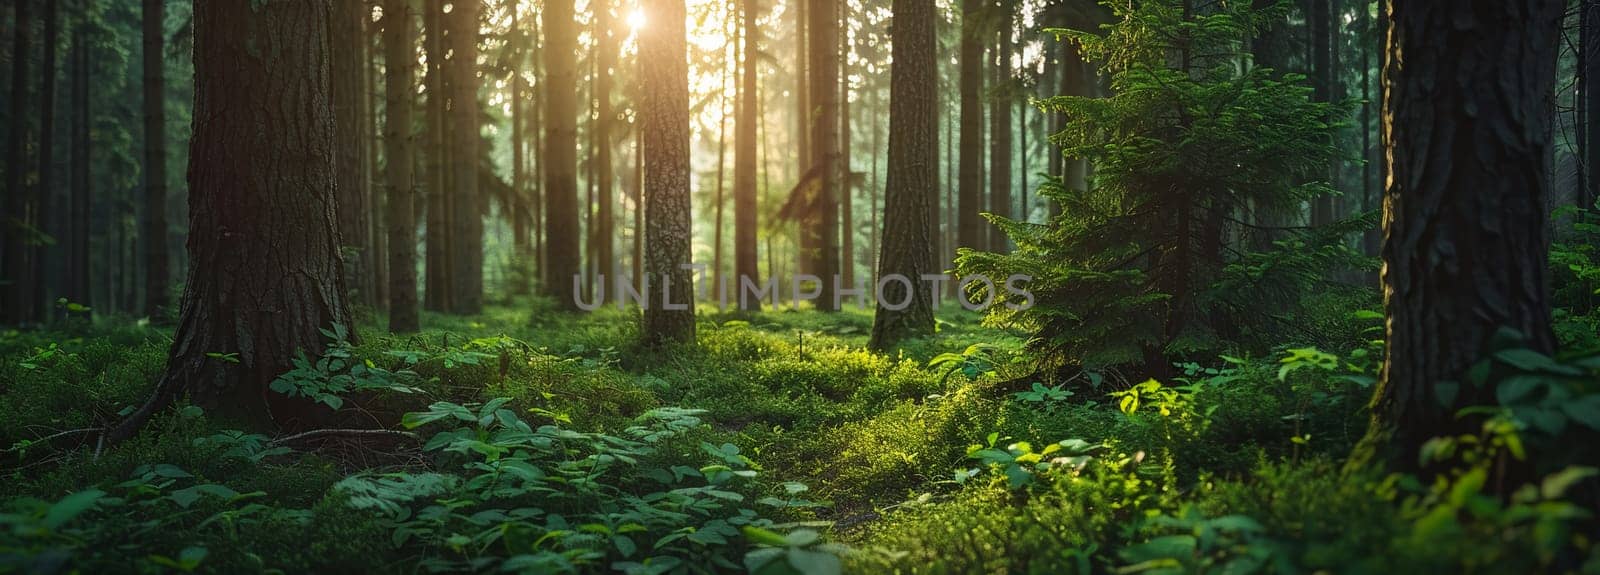 Green summer forest landscape sunbeams trees. Nature background panoramic by Yevhen89